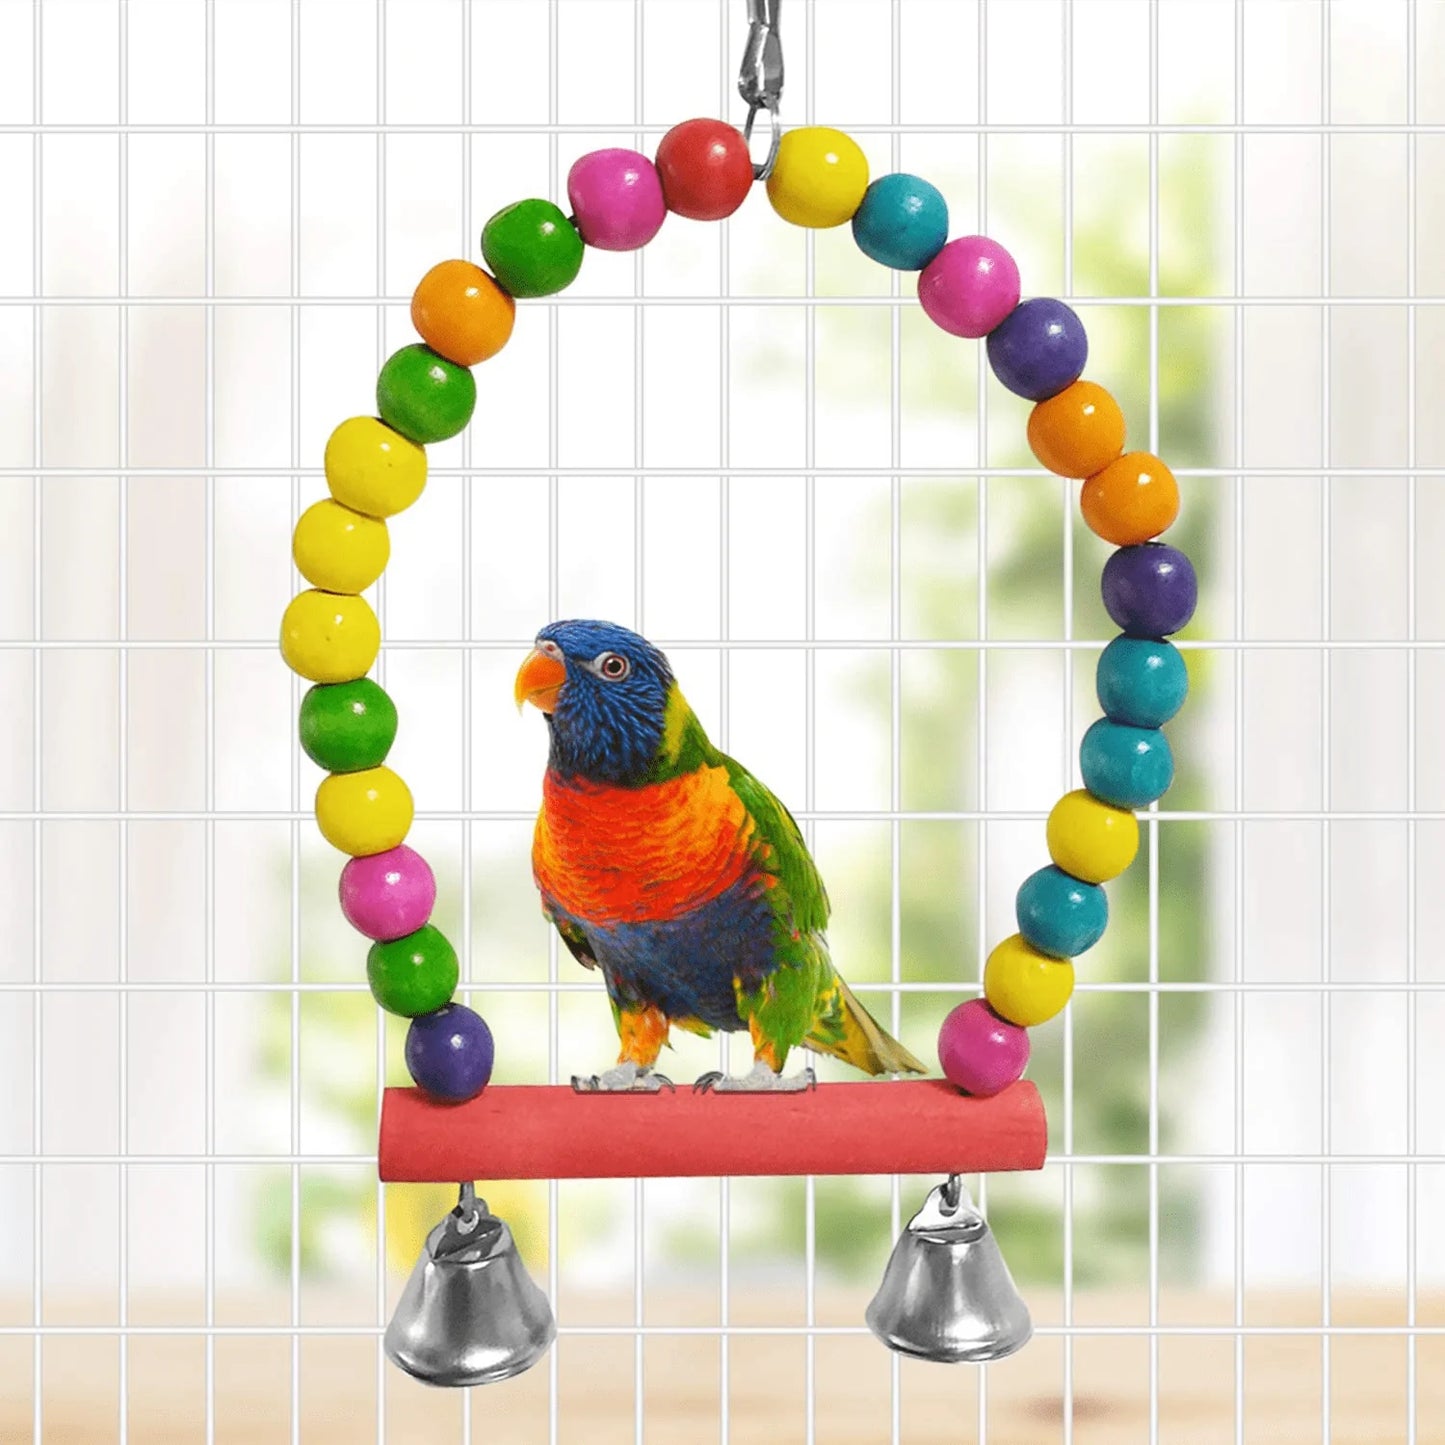 E-KOMG 13 Packs Bird Swing Toys,Parrot Chewing Hanging Perches with Bell,Pet Birds Cage Toys Suitable for Small Parakeets,Love Birds,Cockatiels,Macaws,Finches Animals & Pet Supplies > Pet Supplies > Bird Supplies > Bird Cage Accessories E-KOMG   